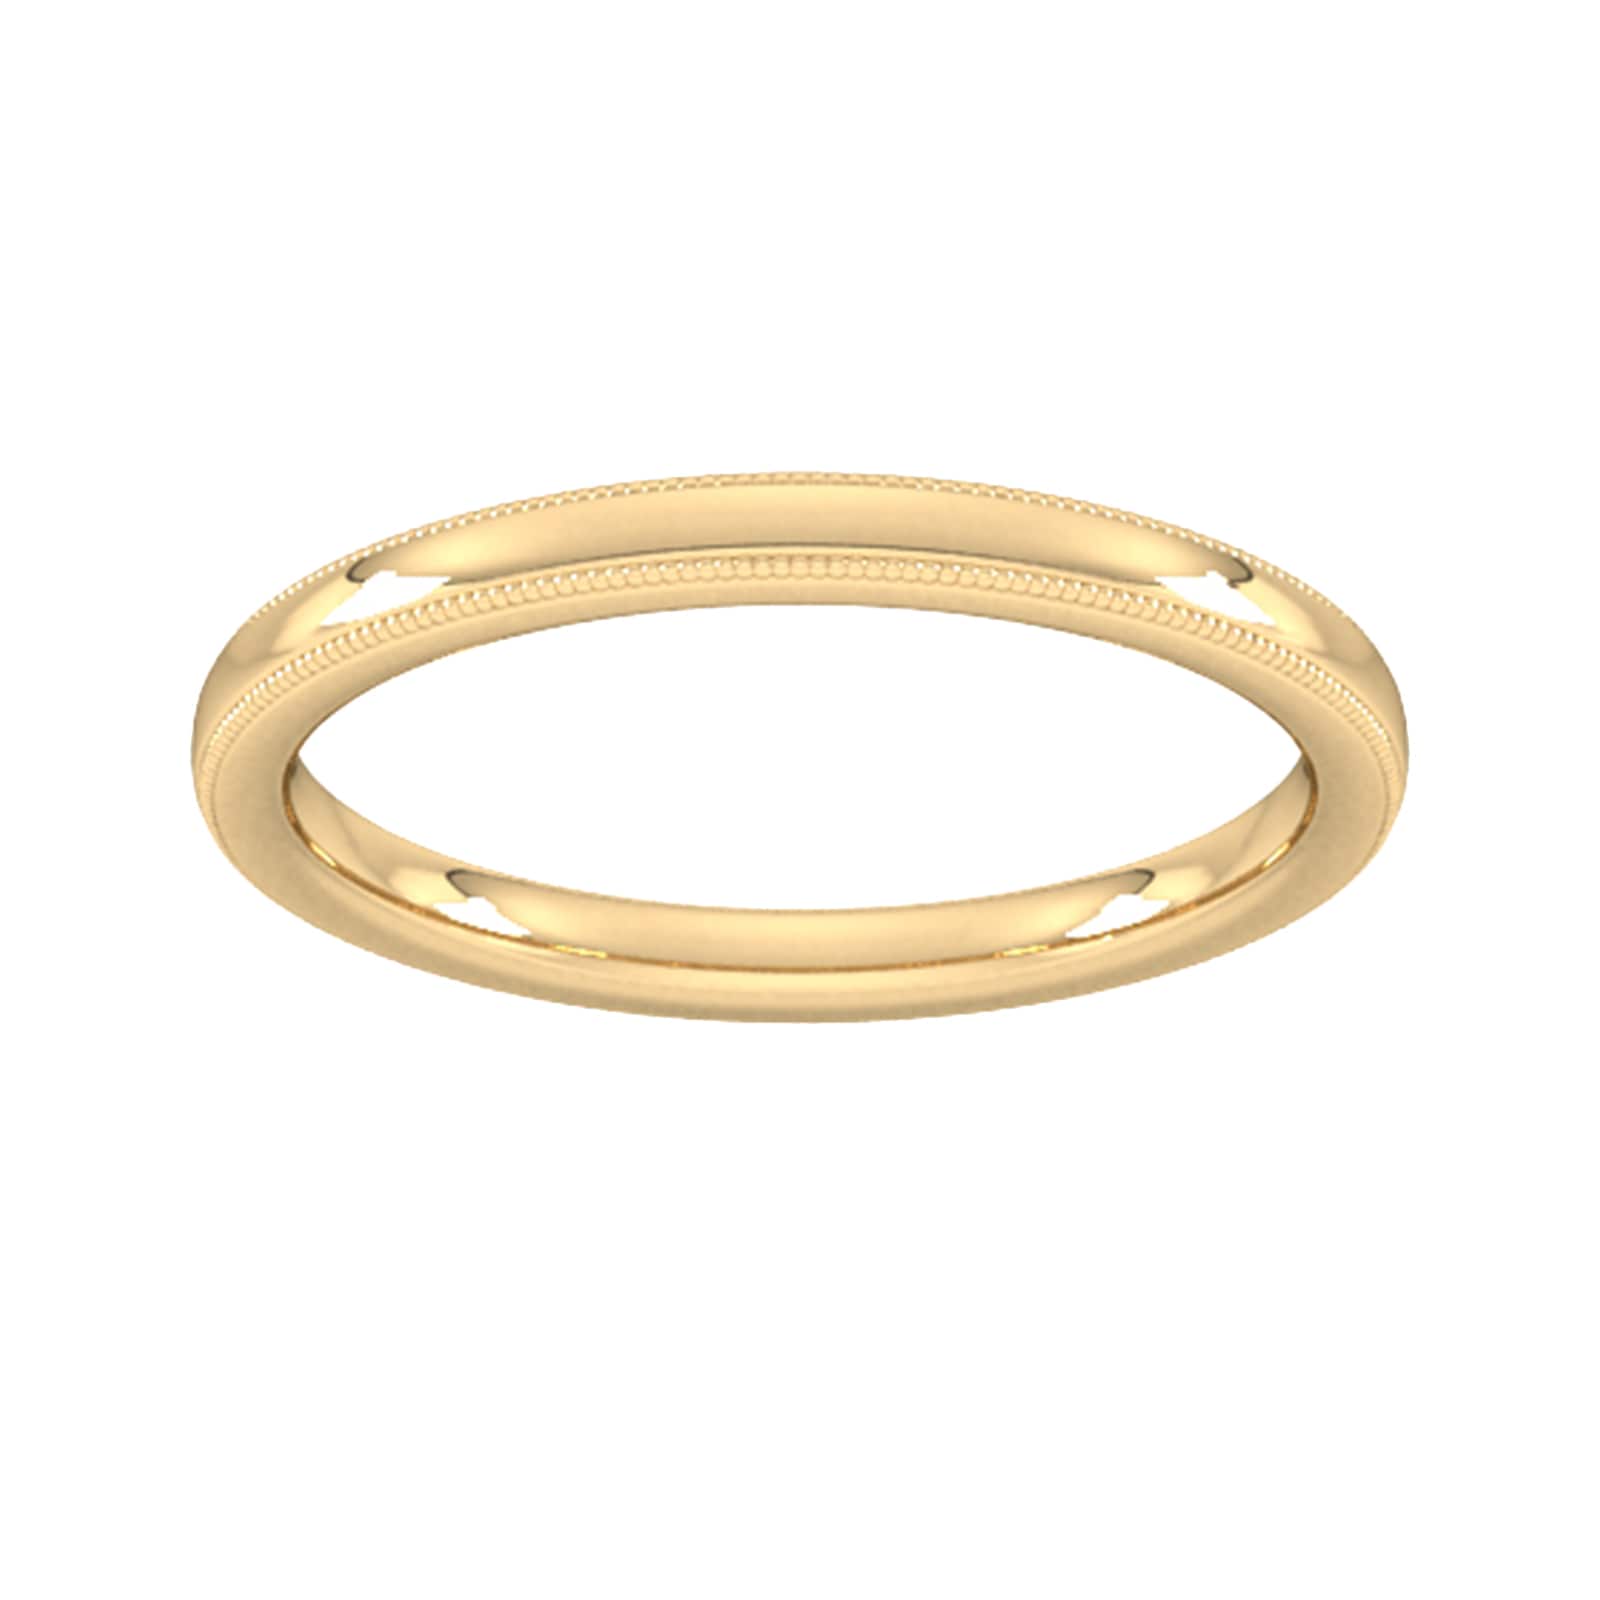 2mm Traditional Court Standard Milgrain Edge Wedding Ring In 9 Carat Yellow Gold - Ring Size T